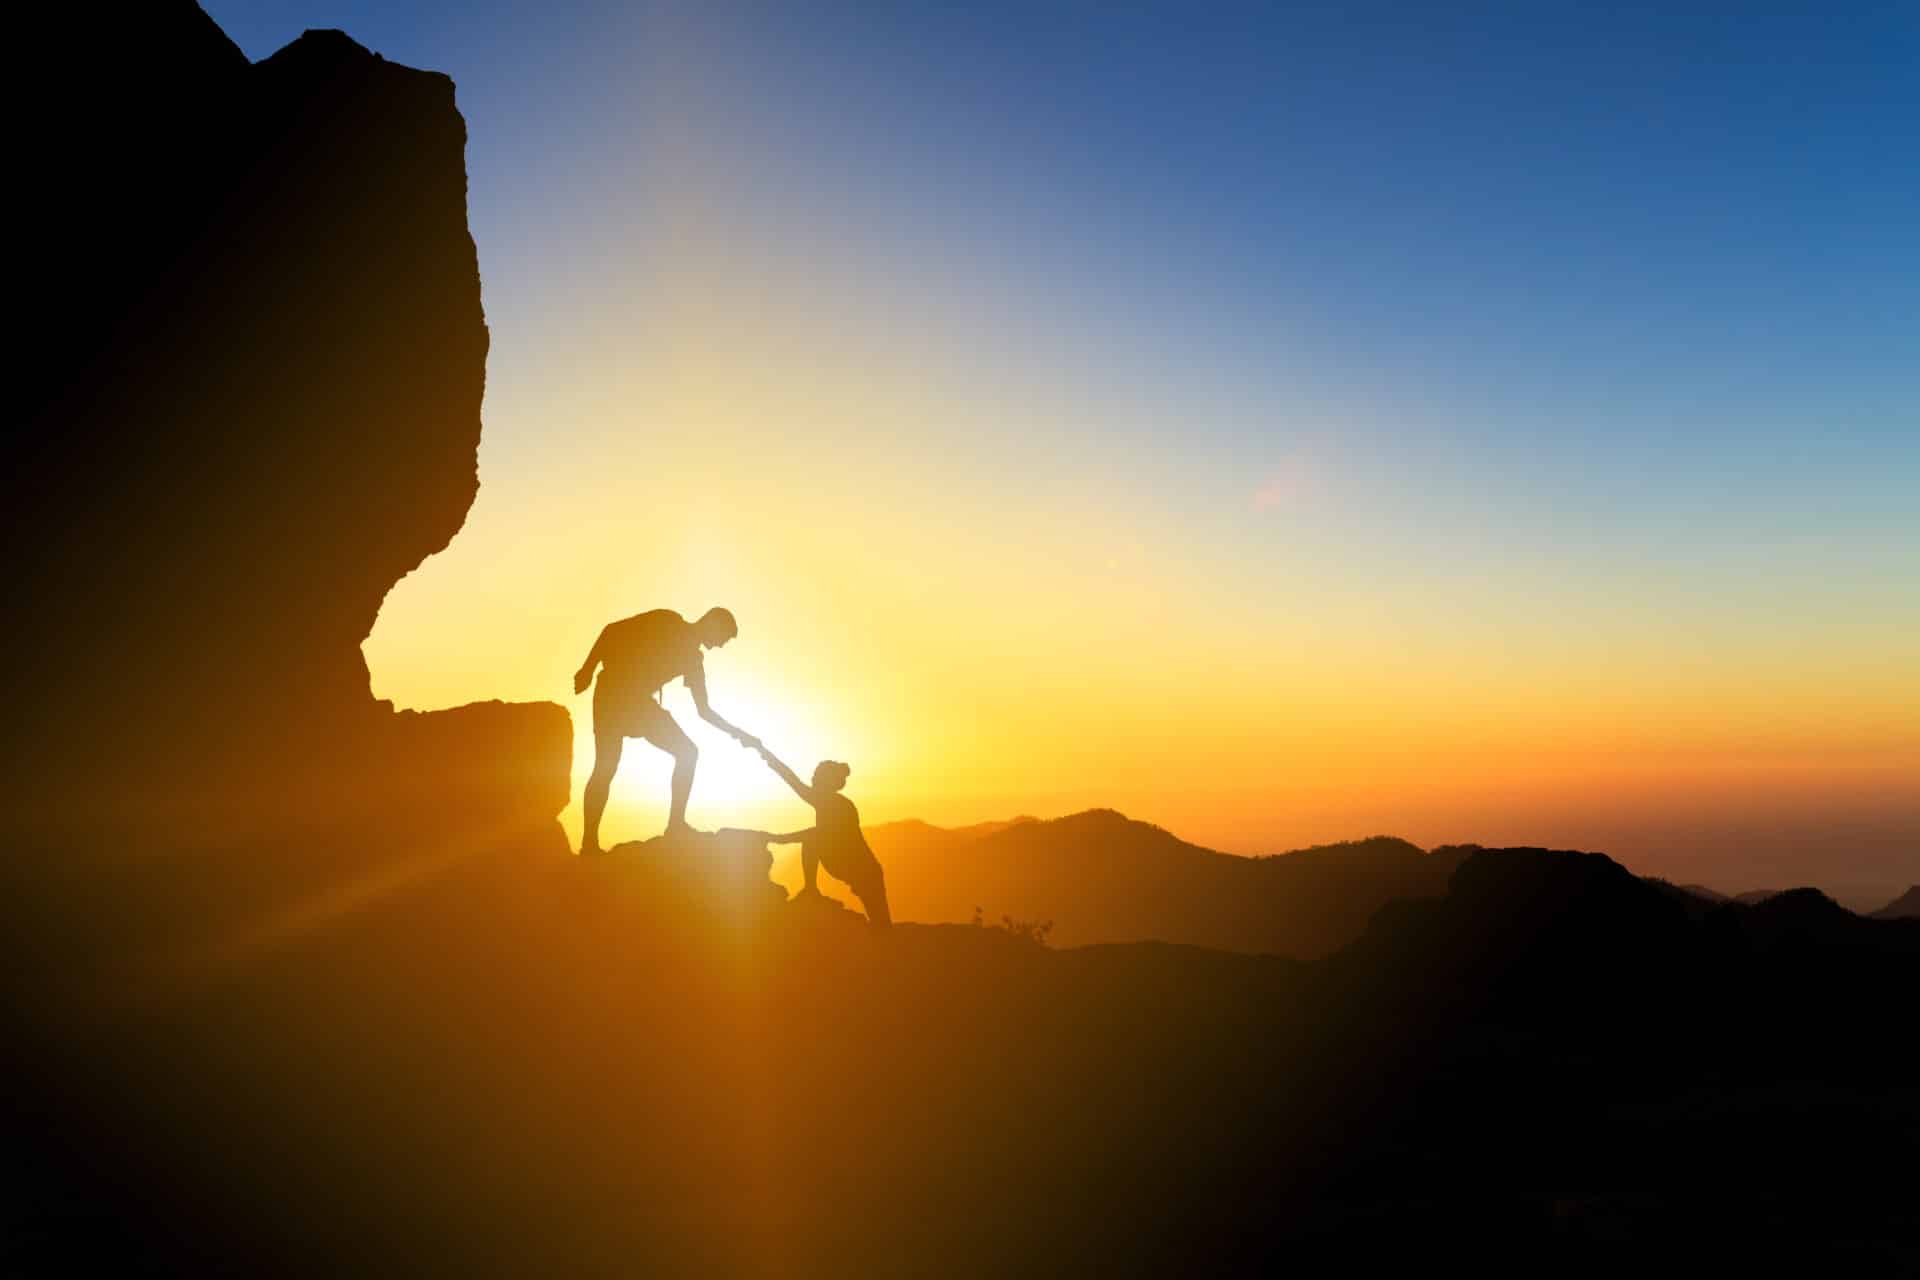 A woman's recovery coach helping her climb up a mountain during sunrise